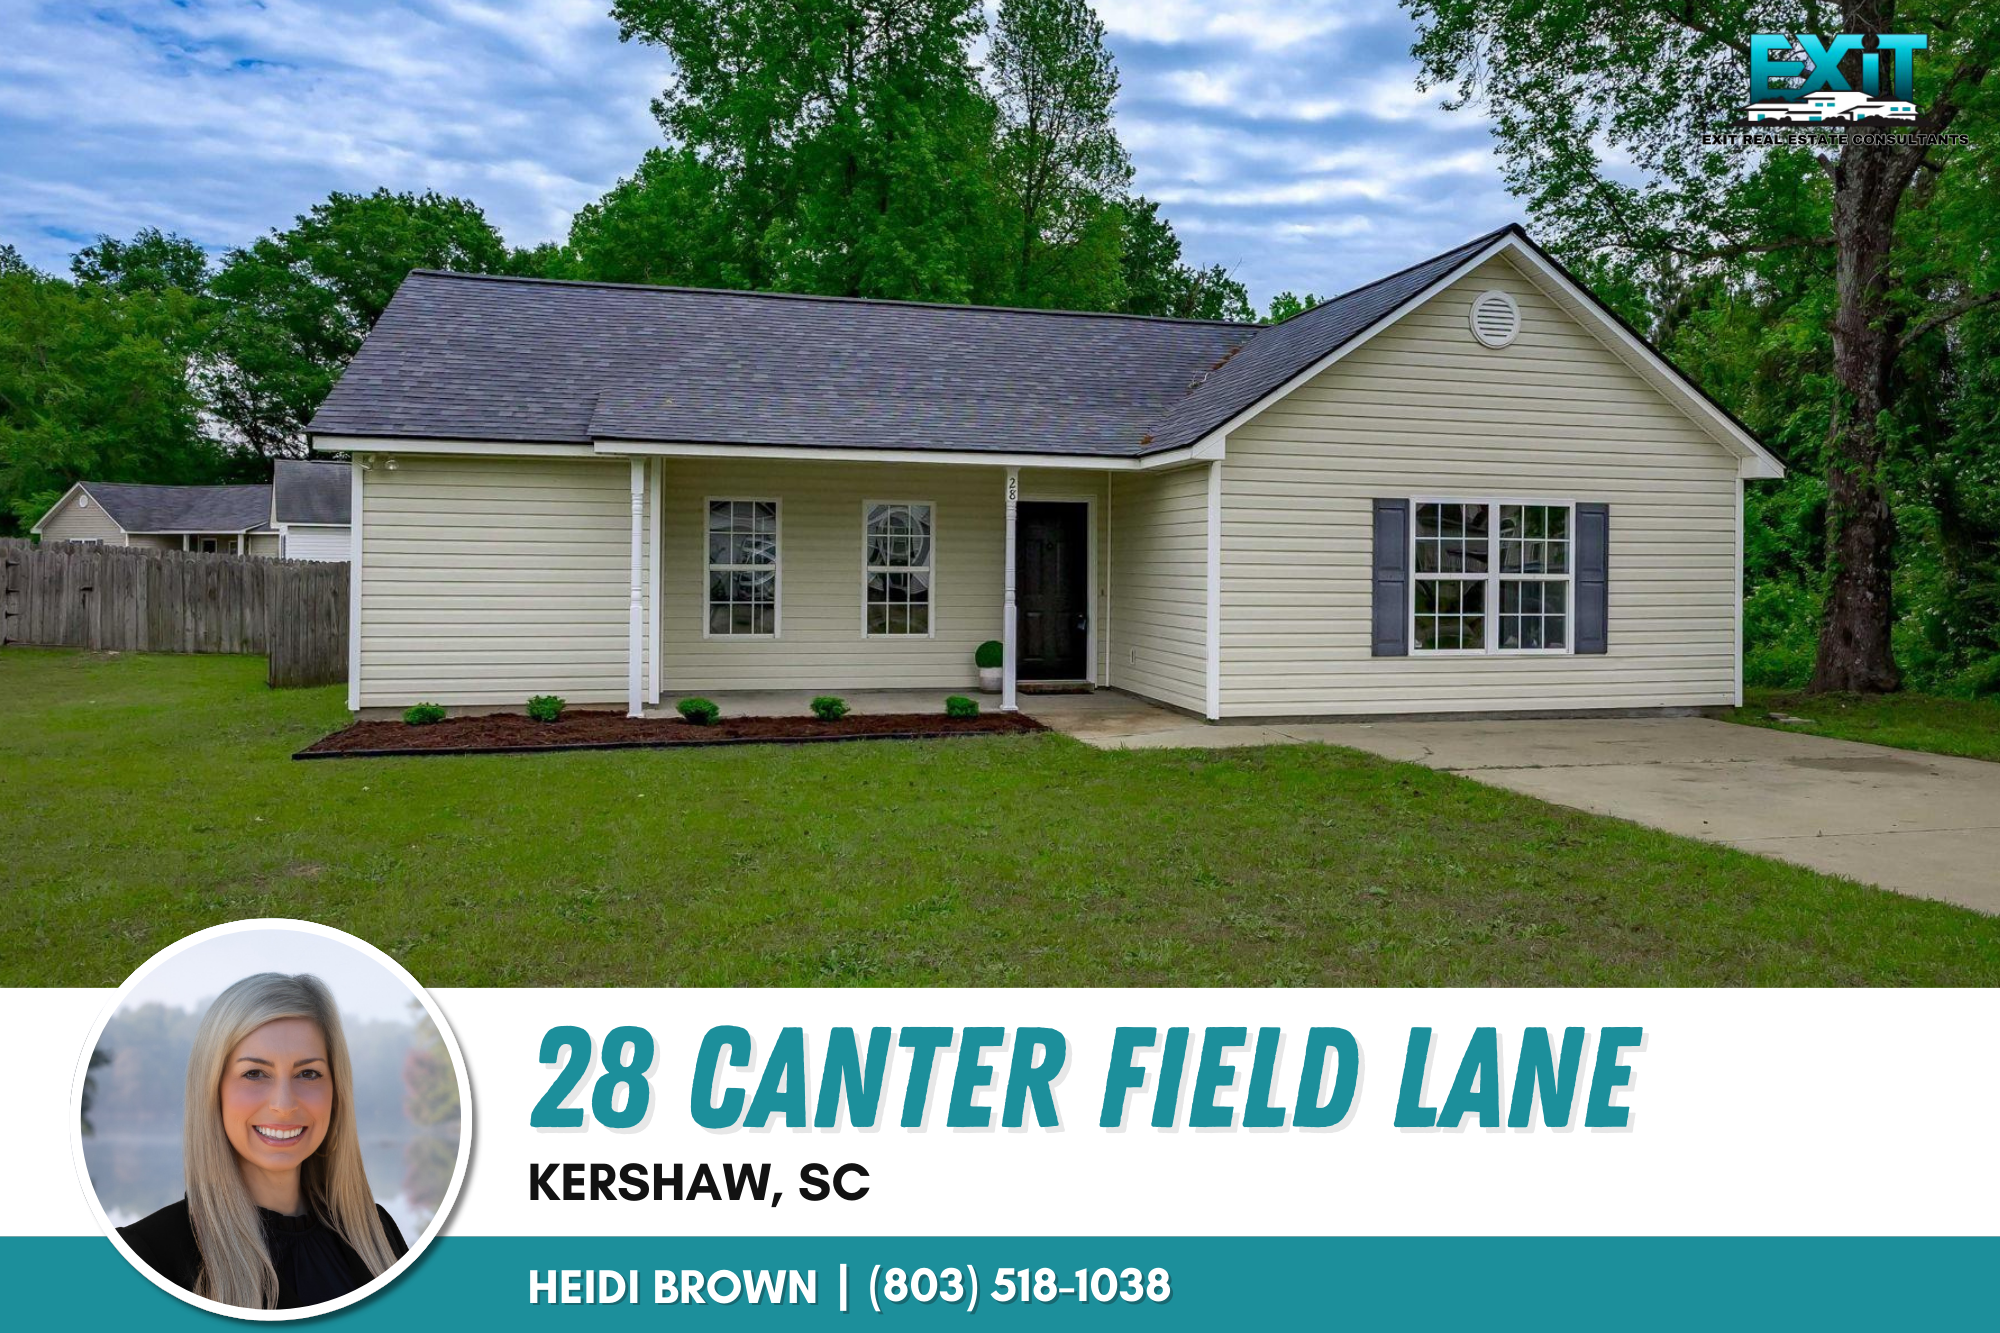 Just listed in Canterfield - Kershaw